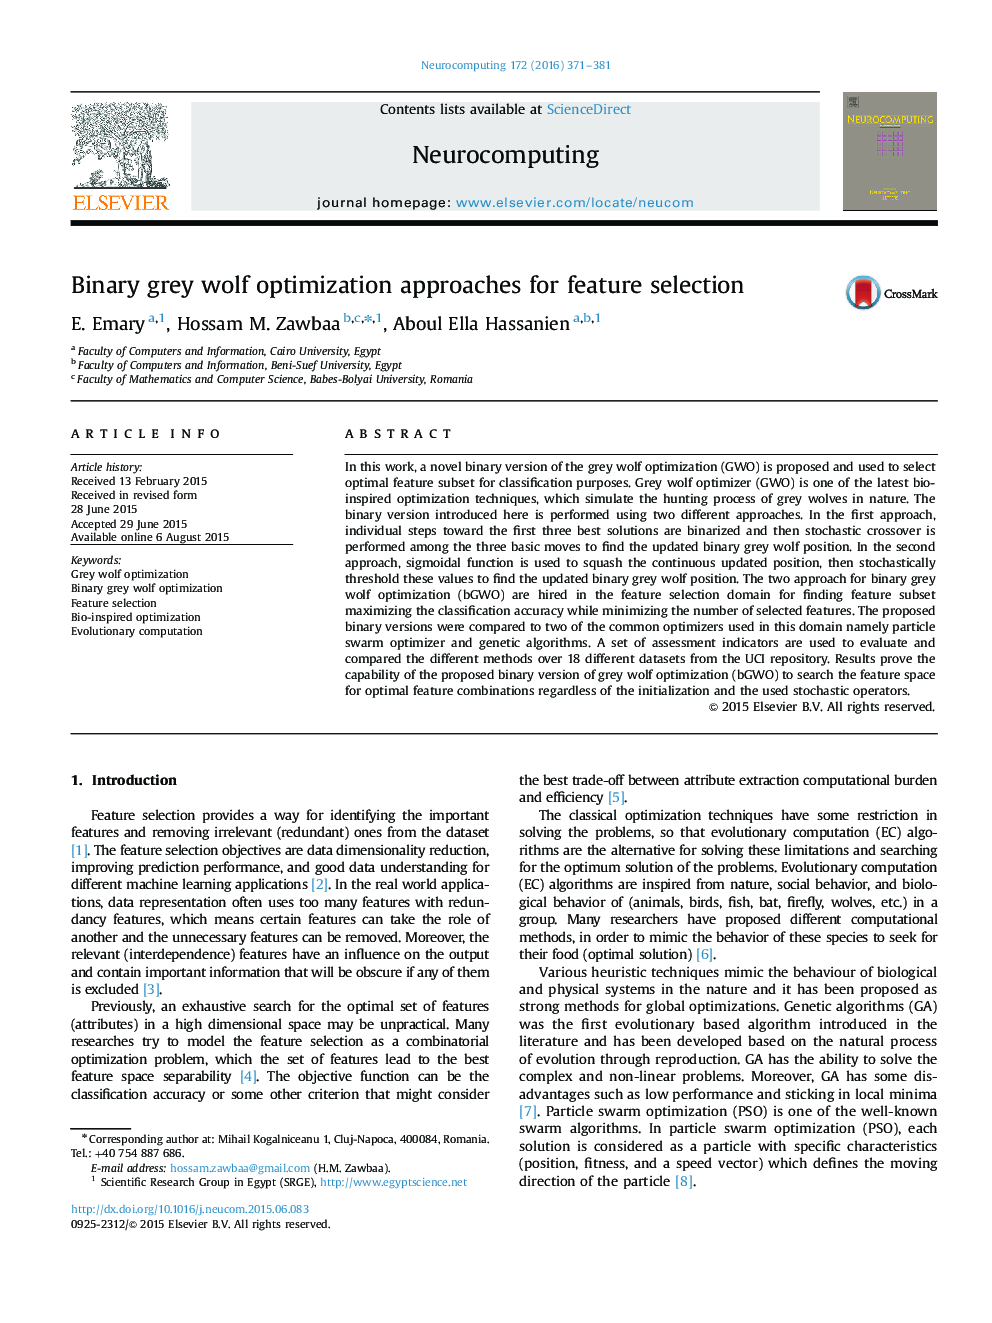 Binary grey wolf optimization approaches for feature selection